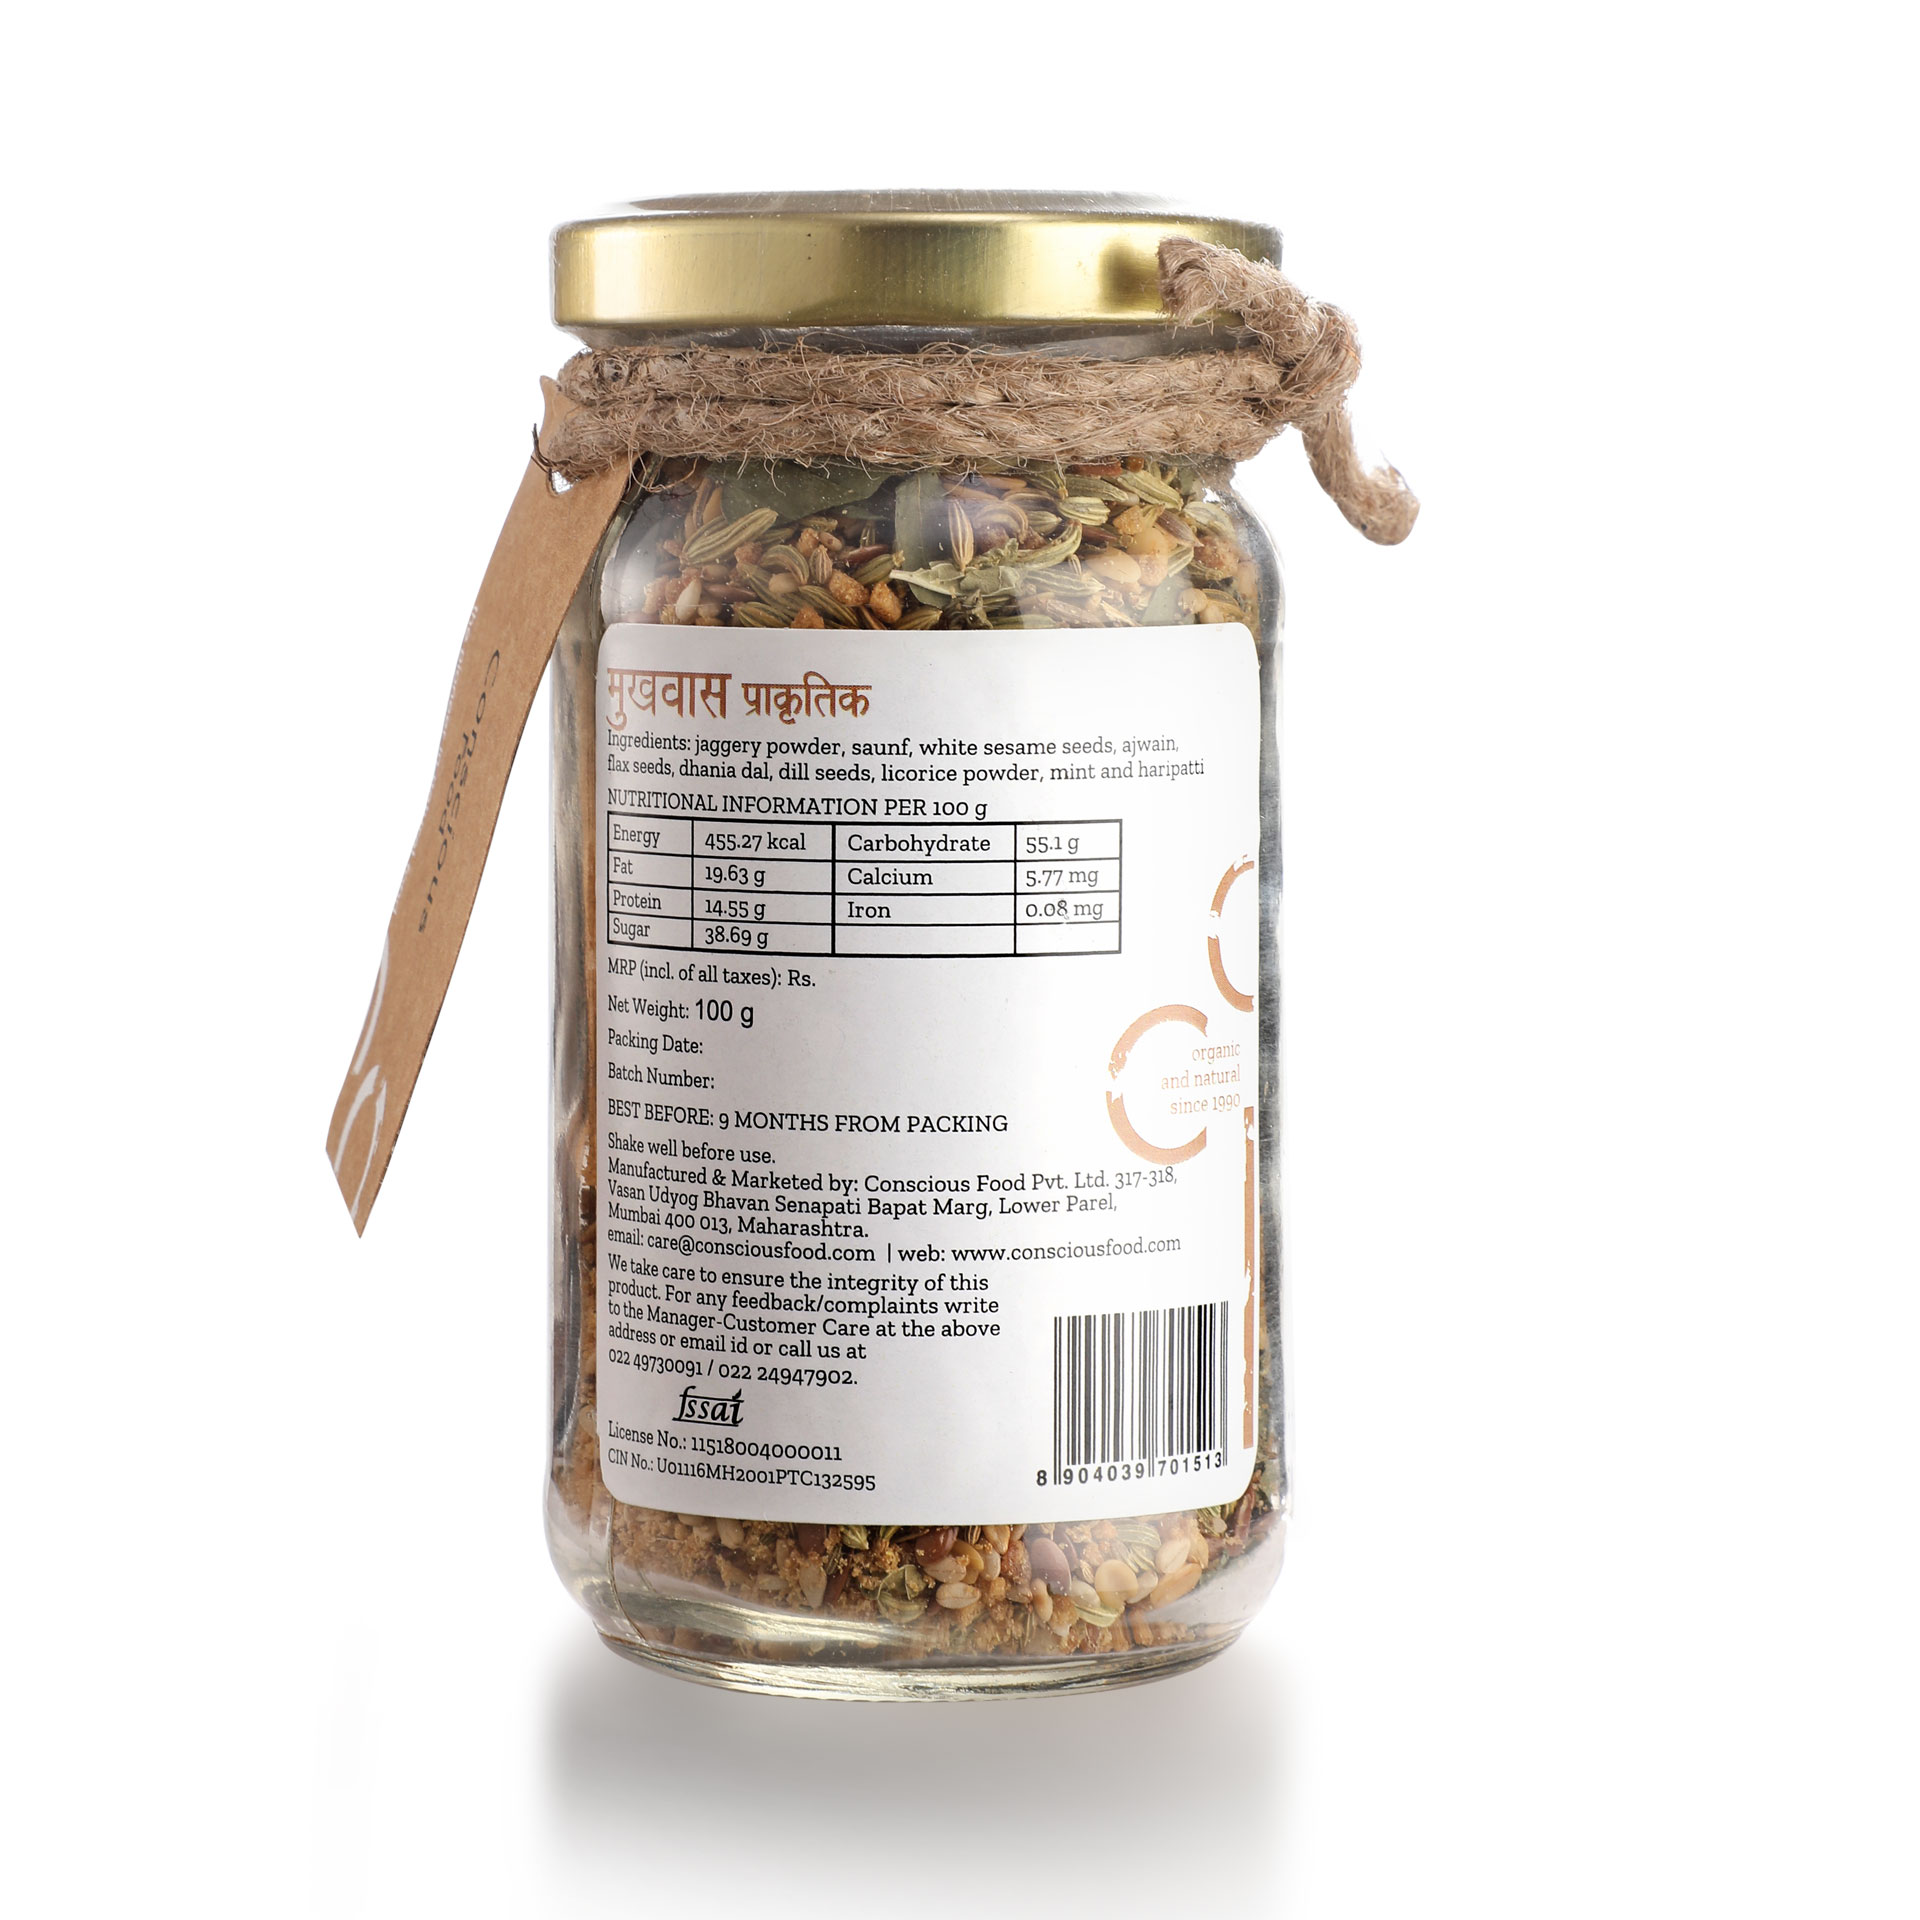 Product: Conscious Food After Meal Digestive 100g